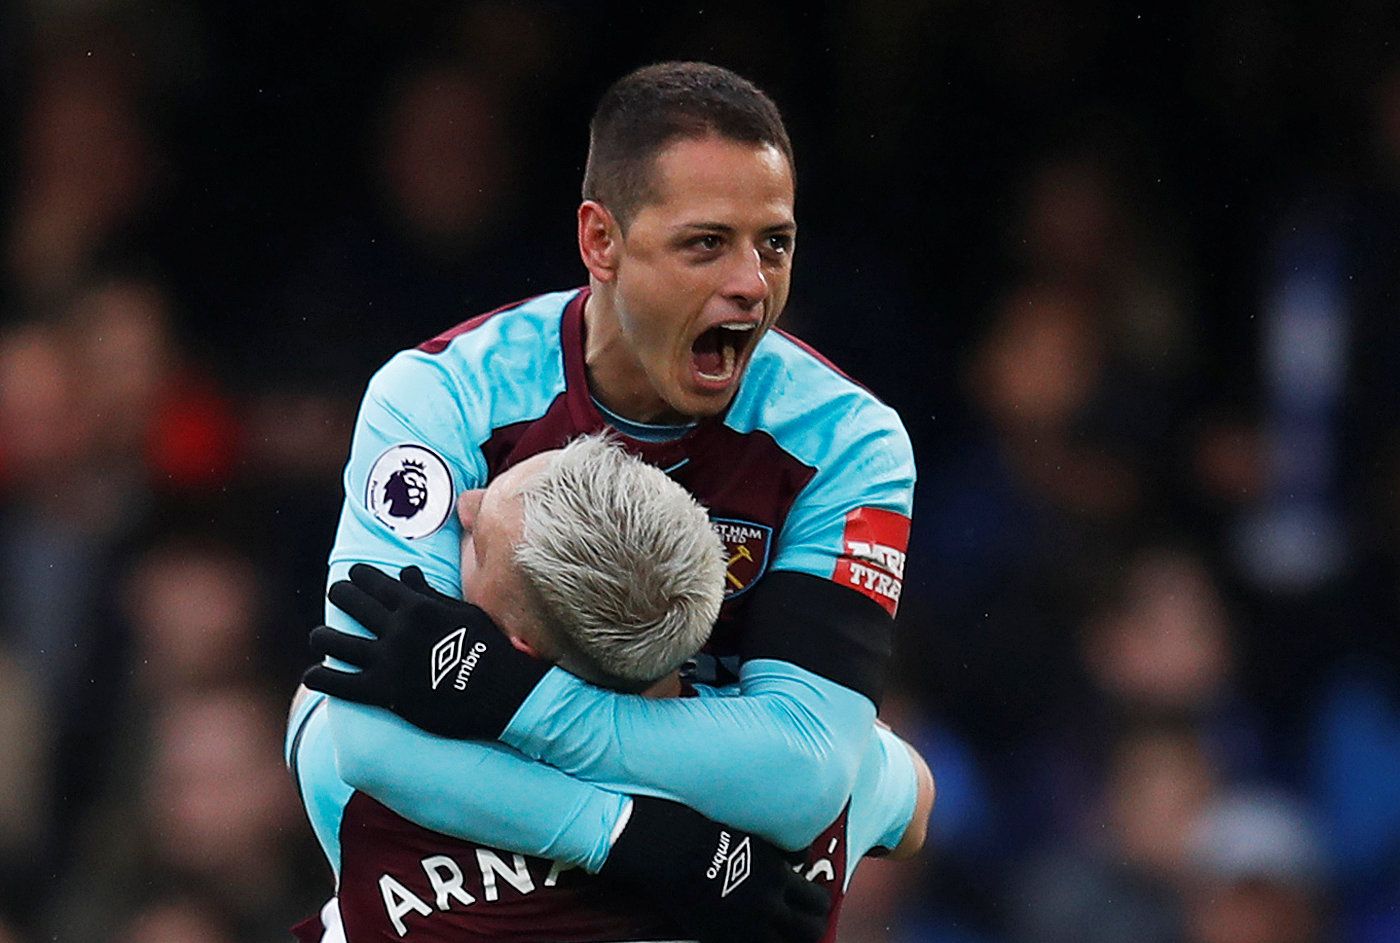 Soccer Football - Premier League - Chelsea vs West Ham United - Stamford Bridge, London, Britain - April 8, 2018   West Ham United's Javier Hernandez celebrates scoring their first goal with Marko Arnautovic   REUTERS/Eddie Keogh    EDITORIAL USE ONLY. No use with unauthorized audio, video, data, fixture lists, club/league logos or "live" services. Online in-match use limited to 75 images, no video emulation. No use in betting, games or single club/league/player publications.  Please contact you